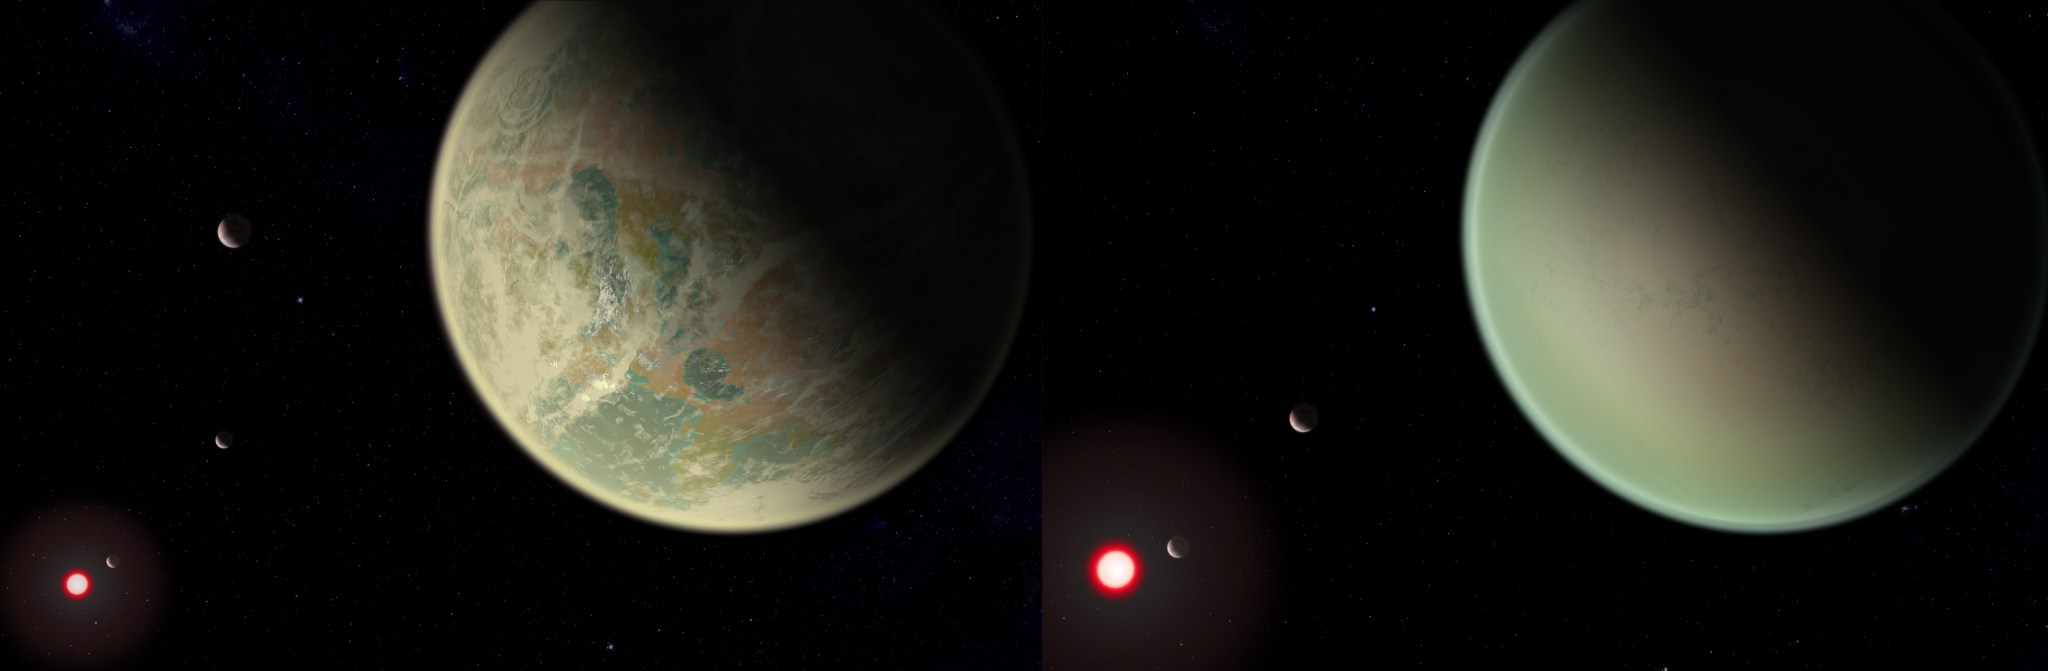 Conceptual image of wet and dry oxygen-rich exoplanets